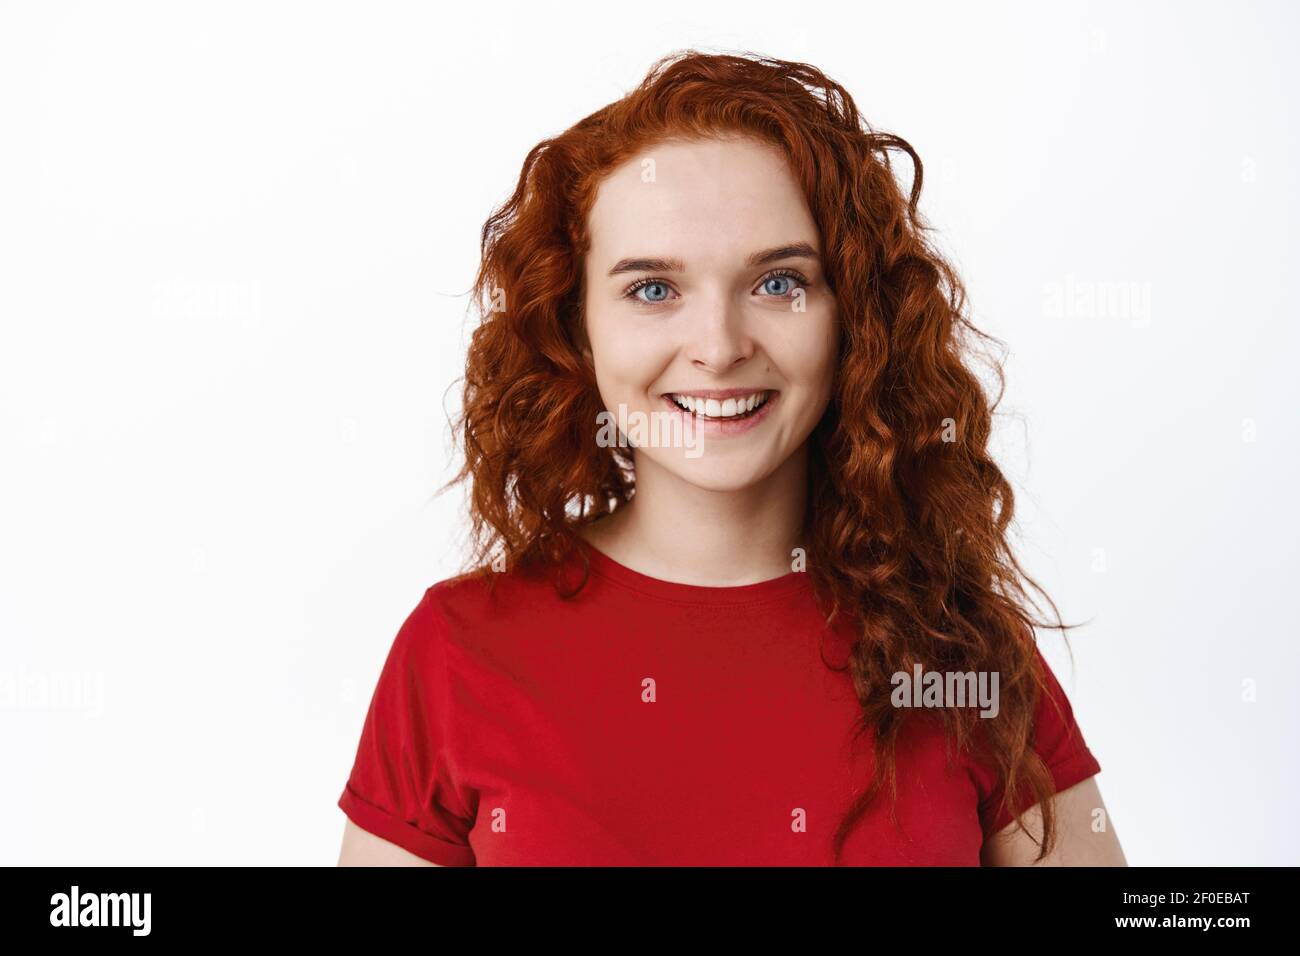 Close-up of candid smiling woman with red curly hair and pale healthy skin, looking cheerful at camera, standing in t-shirt against white background Stock Photo